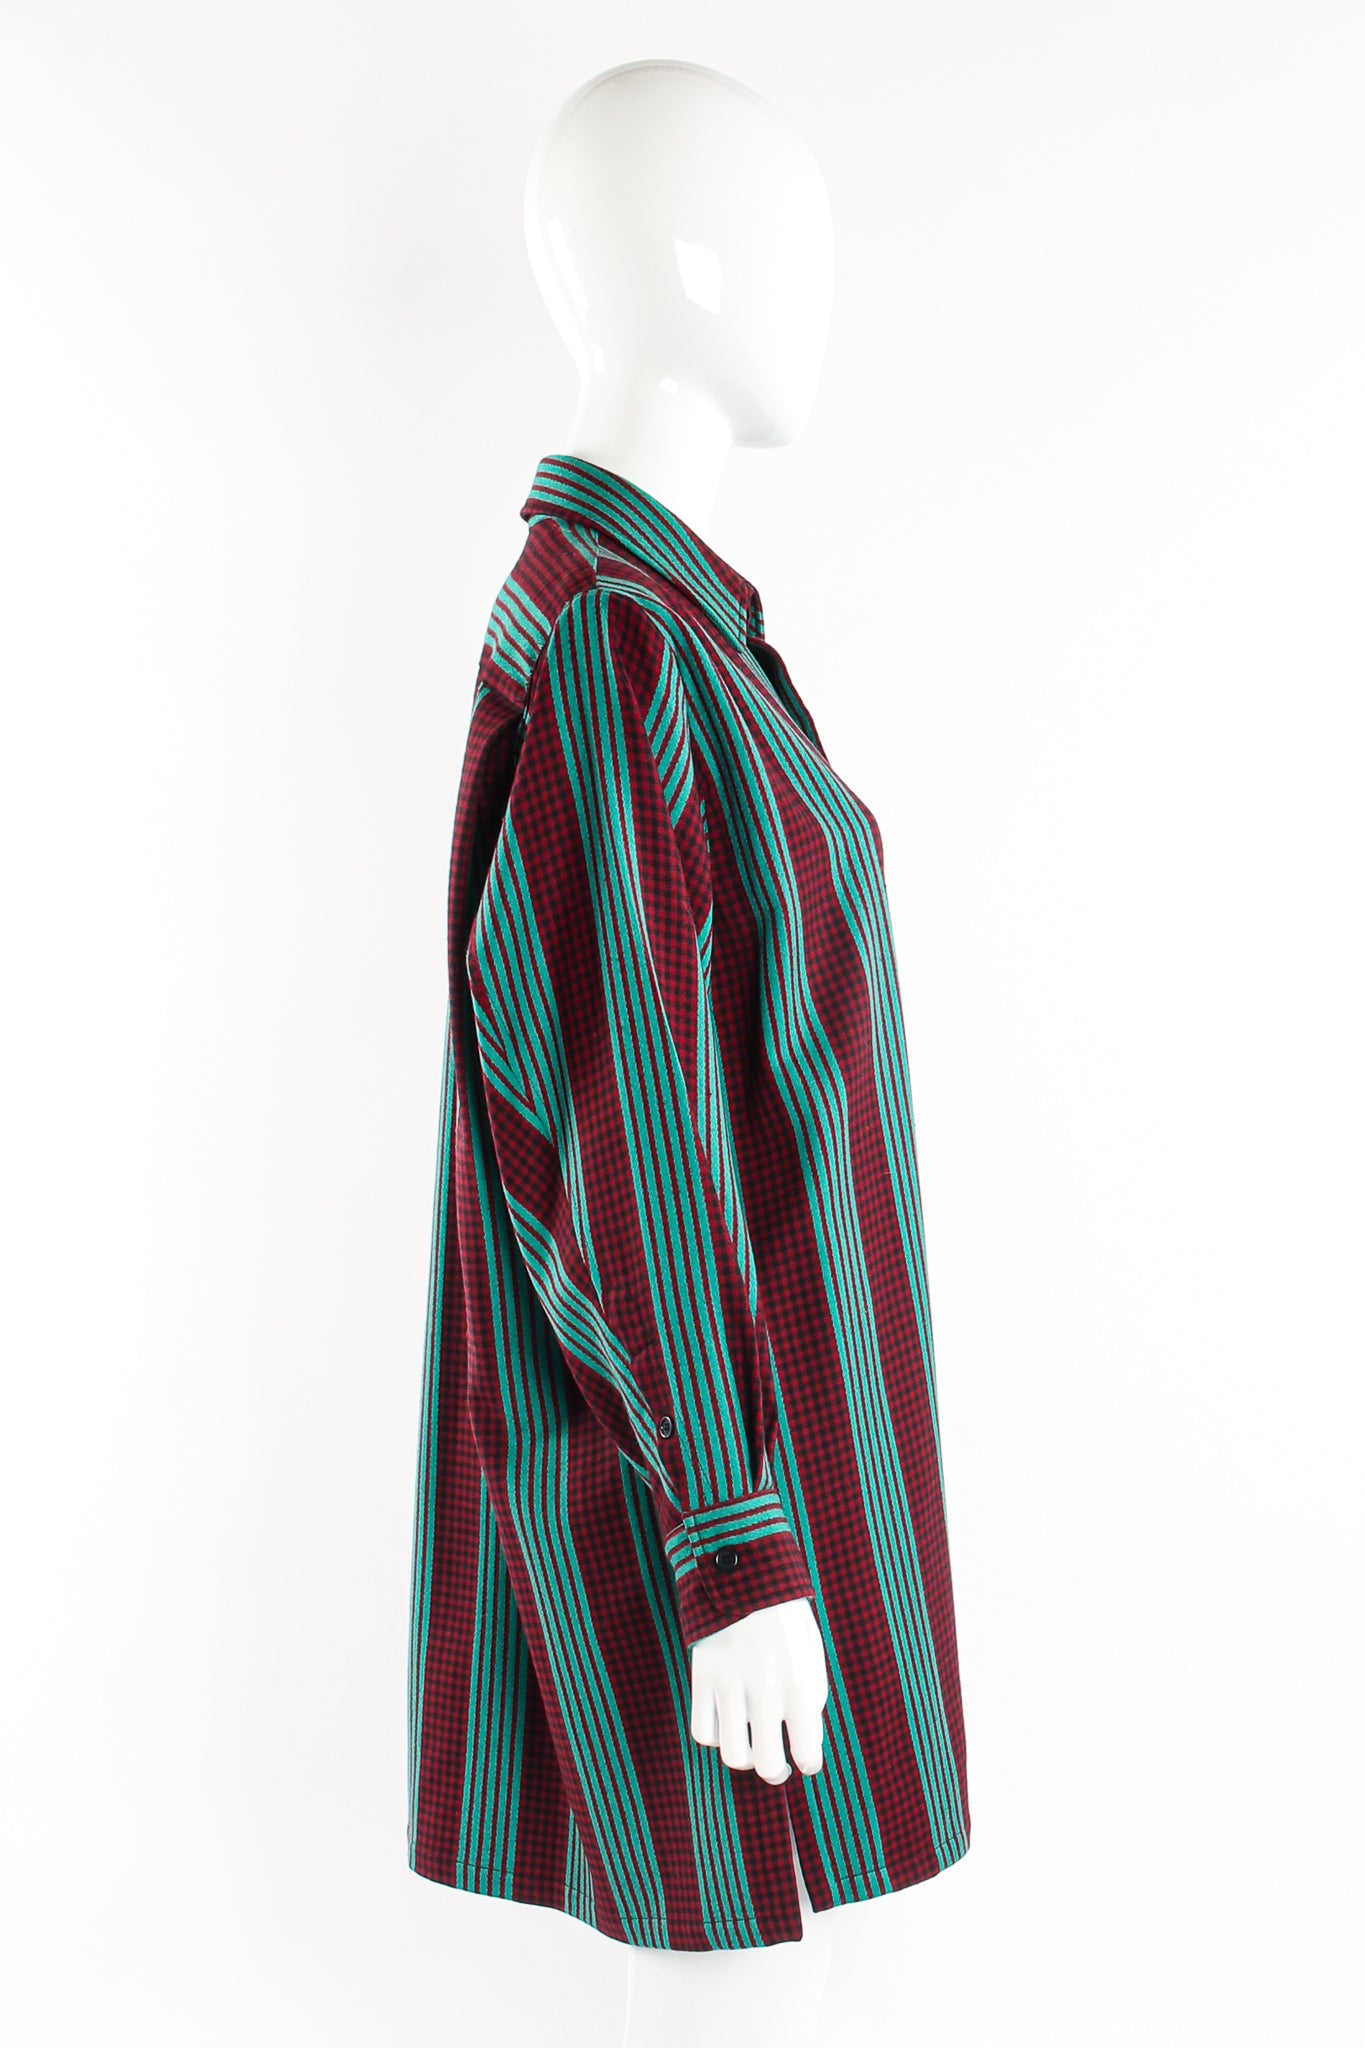 Vintage Kenzo Oversized Striped Plaid Shirt on mannequin at Recess Los Angeles (side)